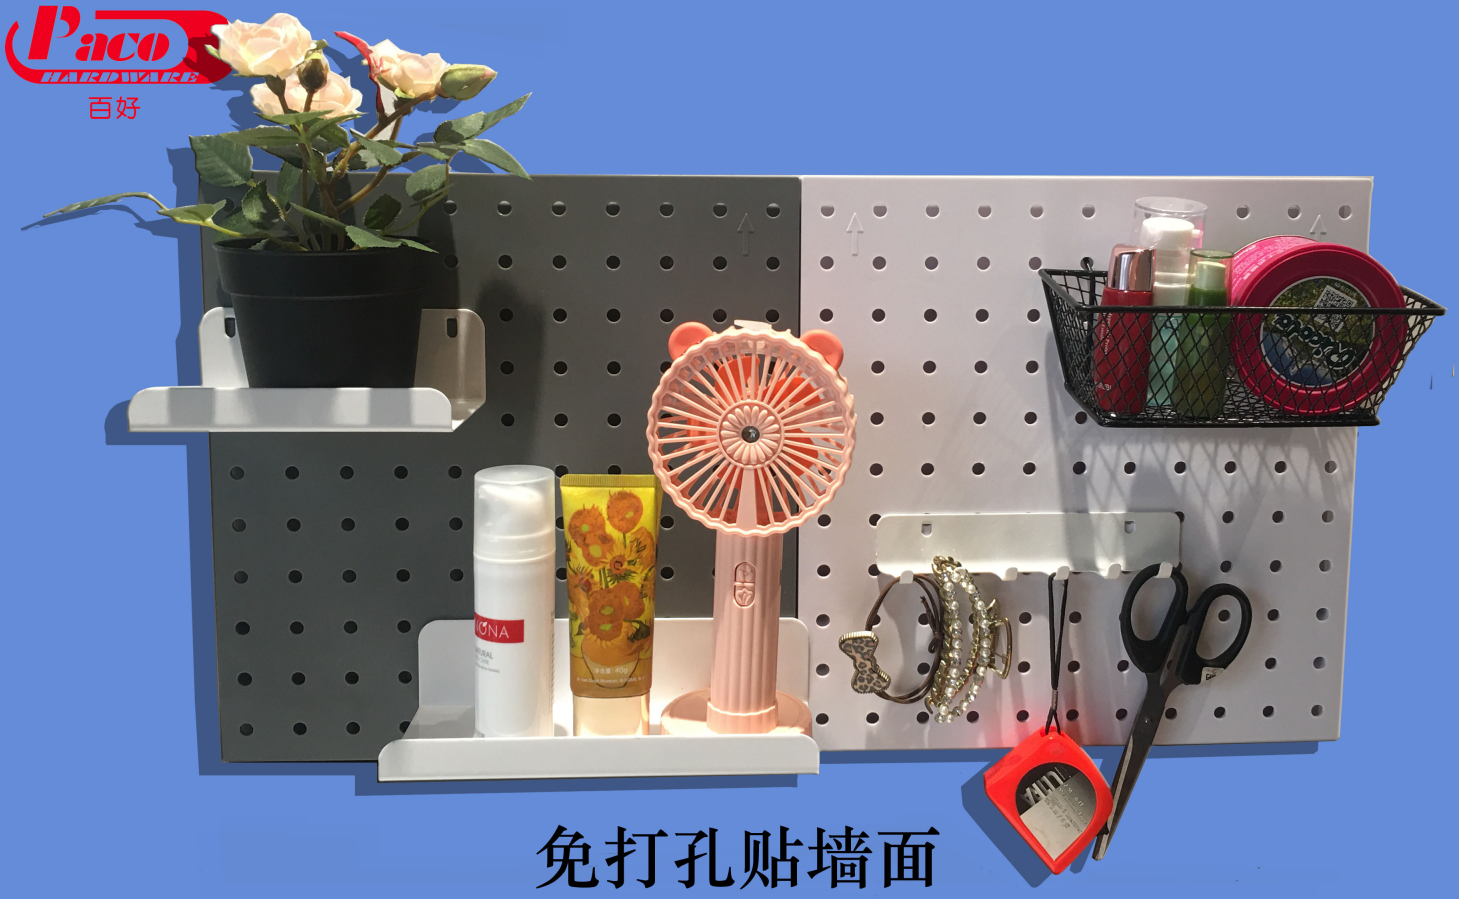 Decorative Pegboard Basket, Pegboard Rack and Pegboard Hook for Organizing Various Tools Manufacturers, Decorative Pegboard Basket, Pegboard Rack and Pegboard Hook for Organizing Various Tools Factory, Supply Decorative Pegboard Basket, Pegboard Rack and Pegboard Hook for Organizing Various Tools